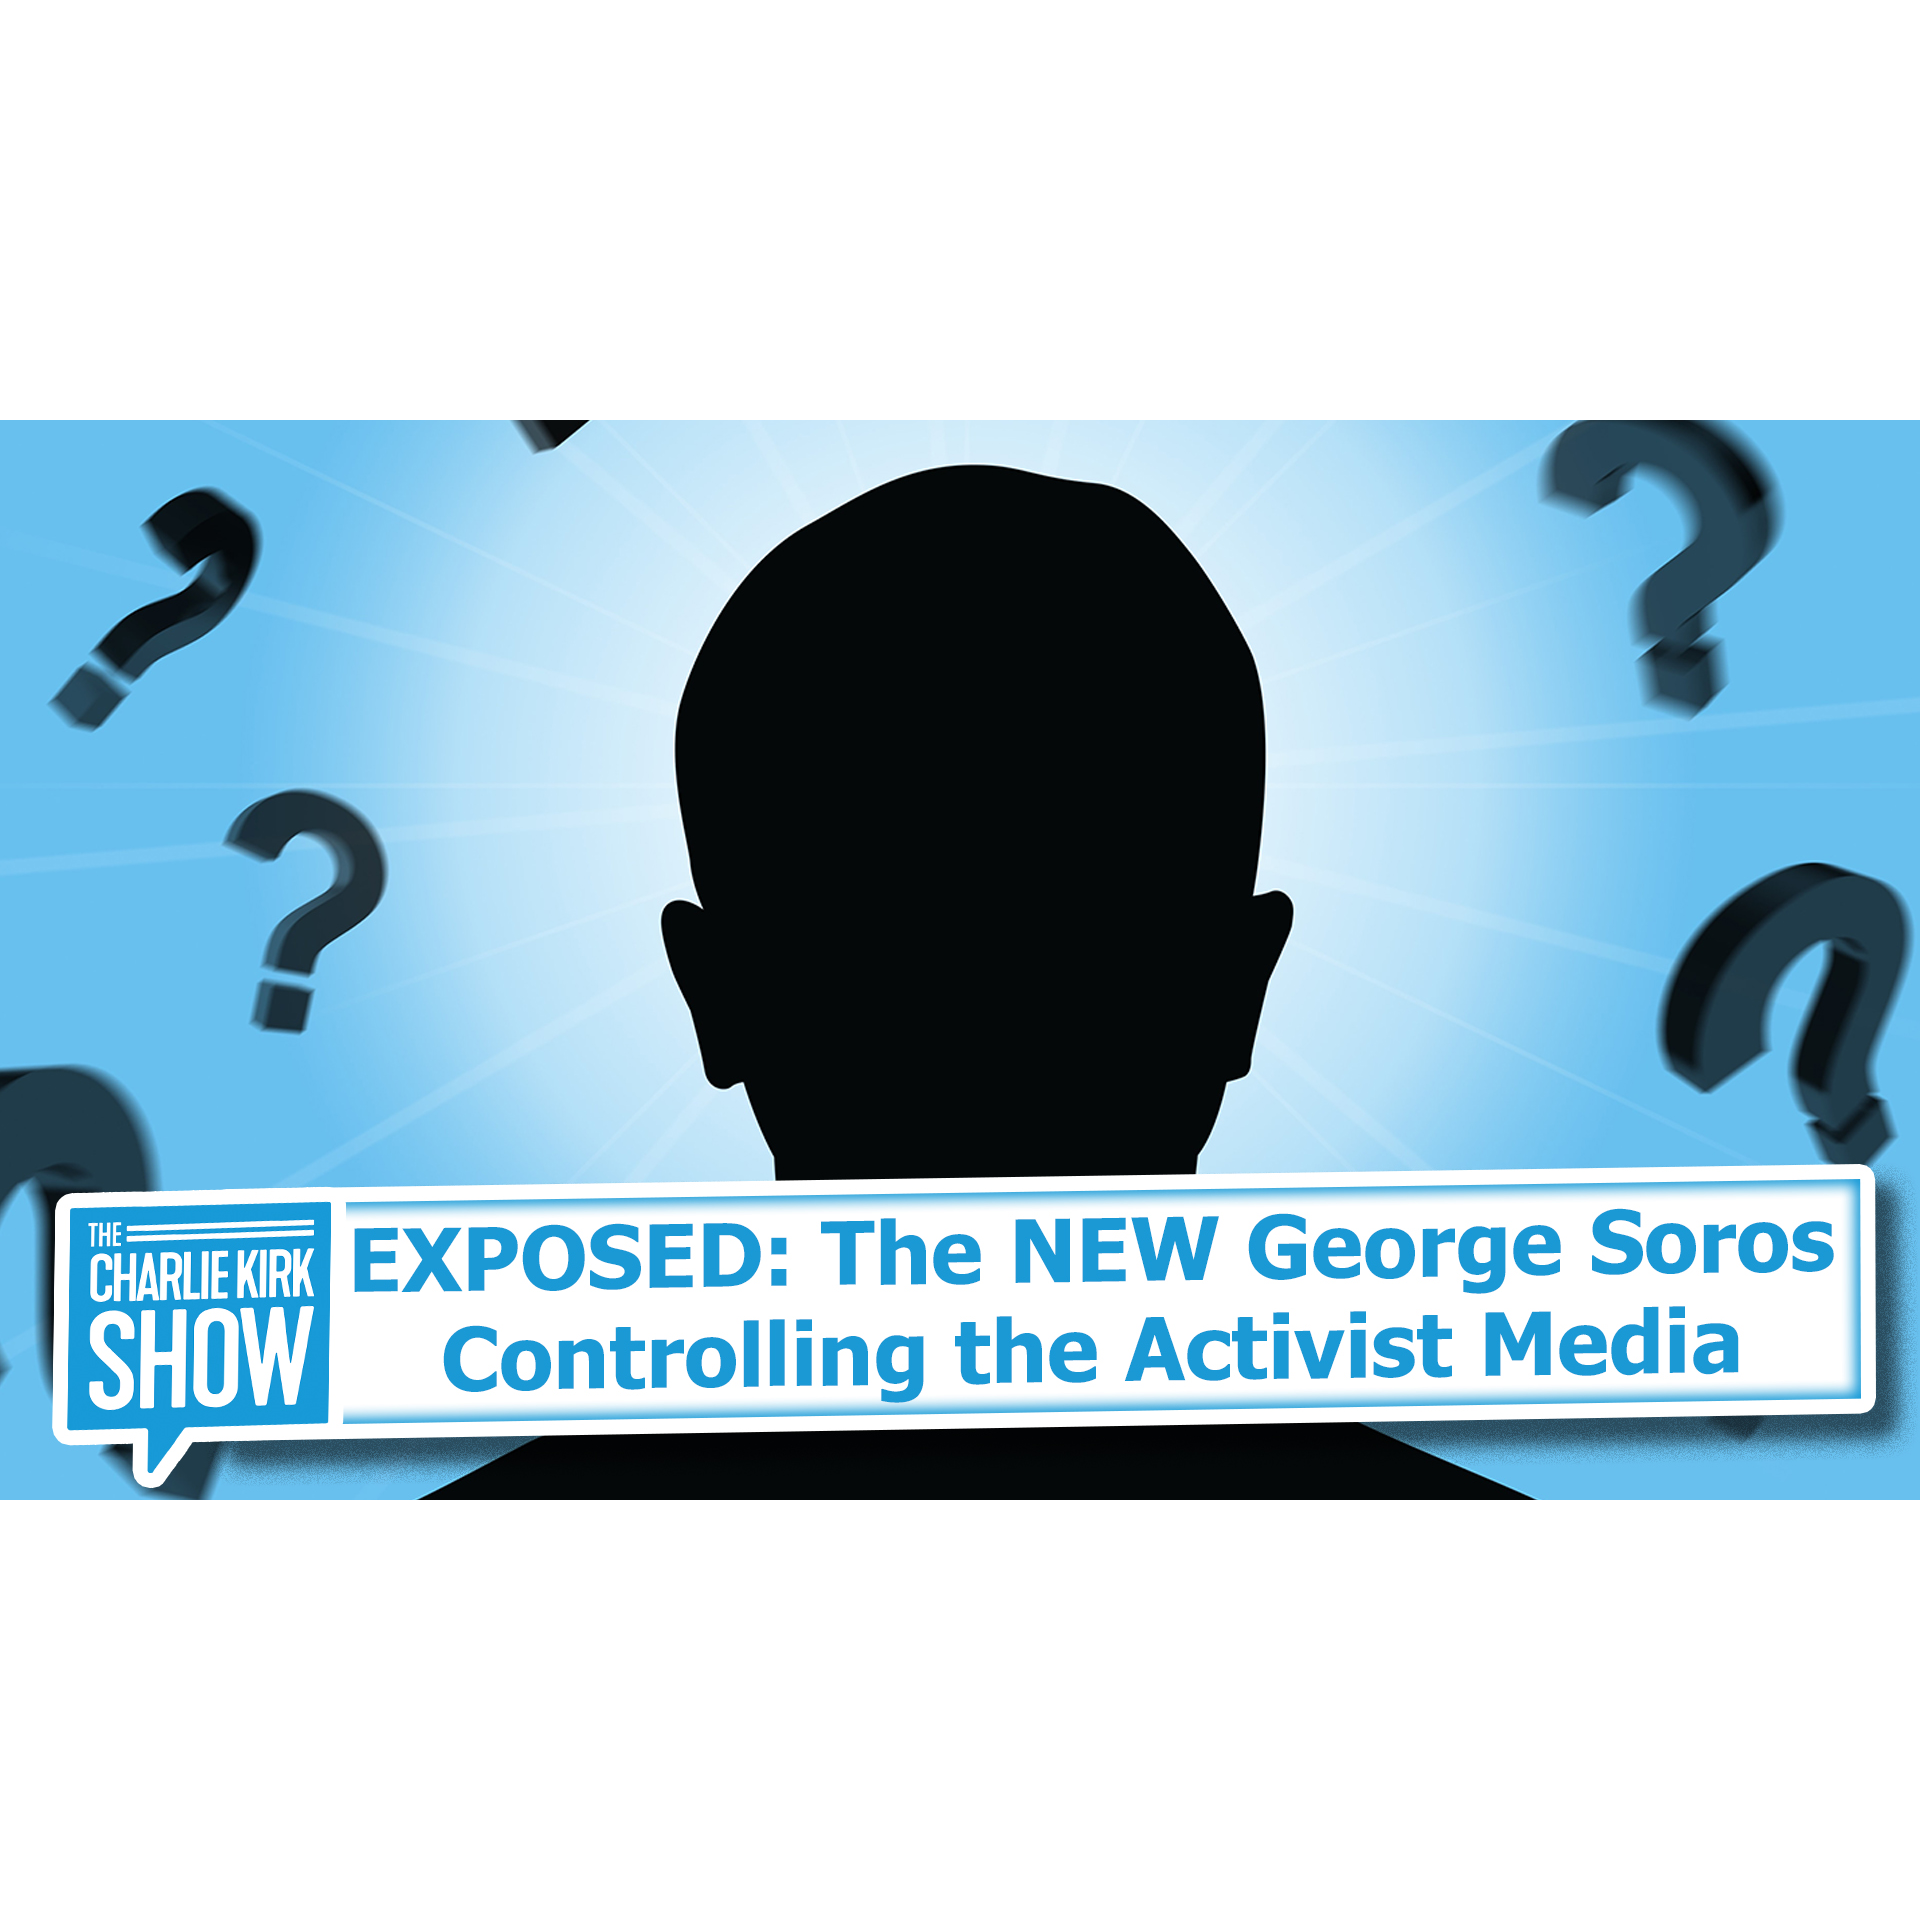 EXPOSED: The NEW George Soros Controlling the Activist Media